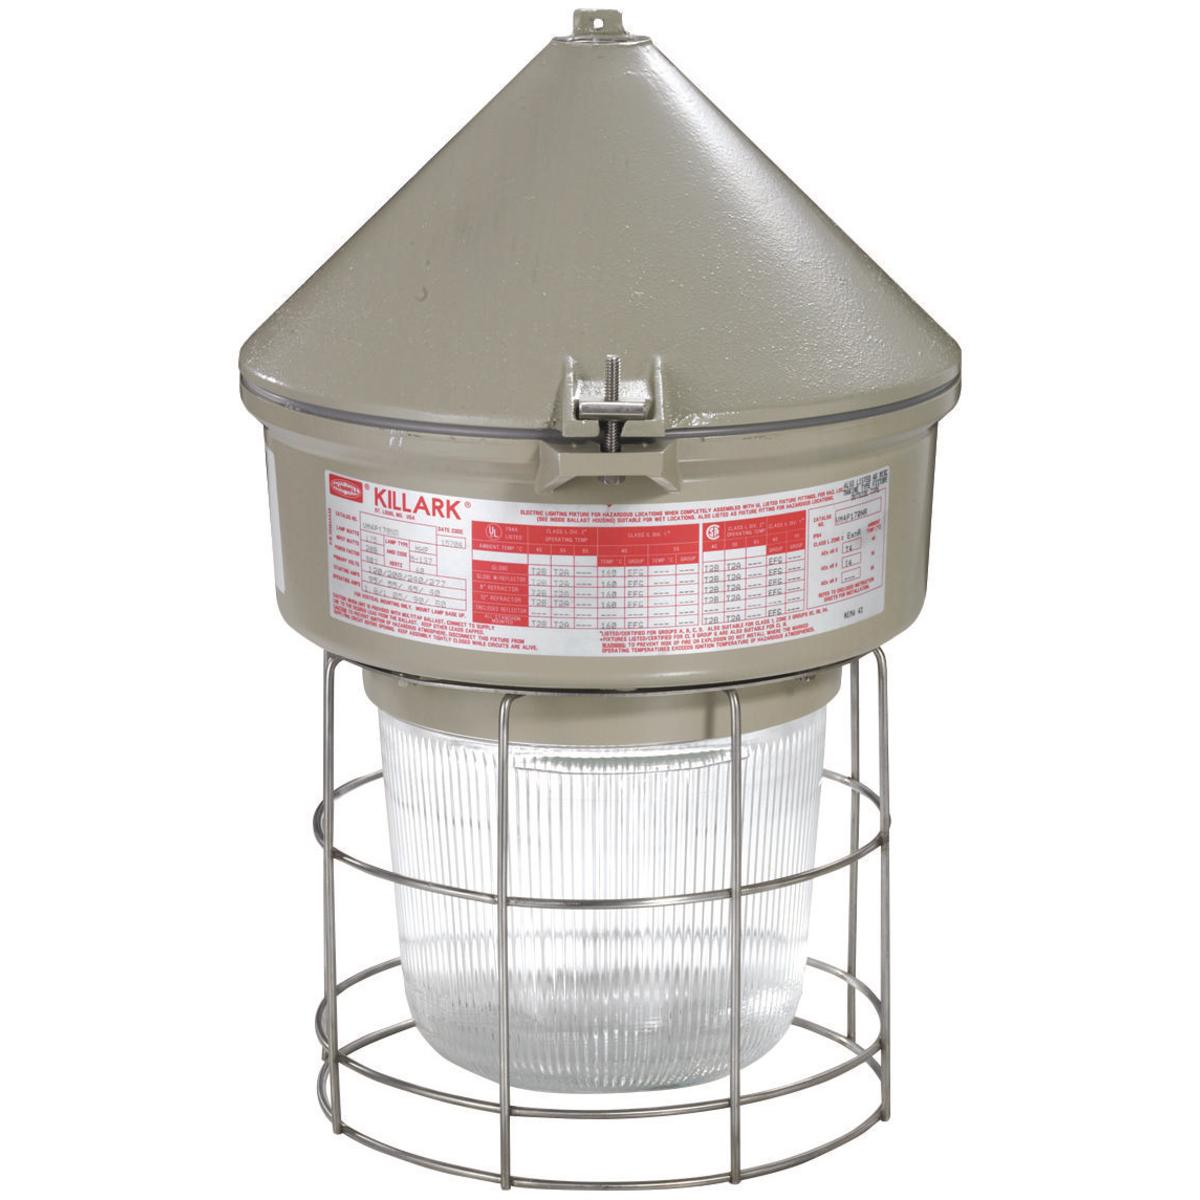 Hubbell VM4P175C2R1G VM4 Series - 175W Metal Halide 480V - 3/4" Cone Top - Type I Glass Refractor and Guard  ; Ballast tank and splice box – corrosion resistant copper-free aluminum alloy with baked powder epoxy/polyester finish, electrostatically applied for complete, unifor